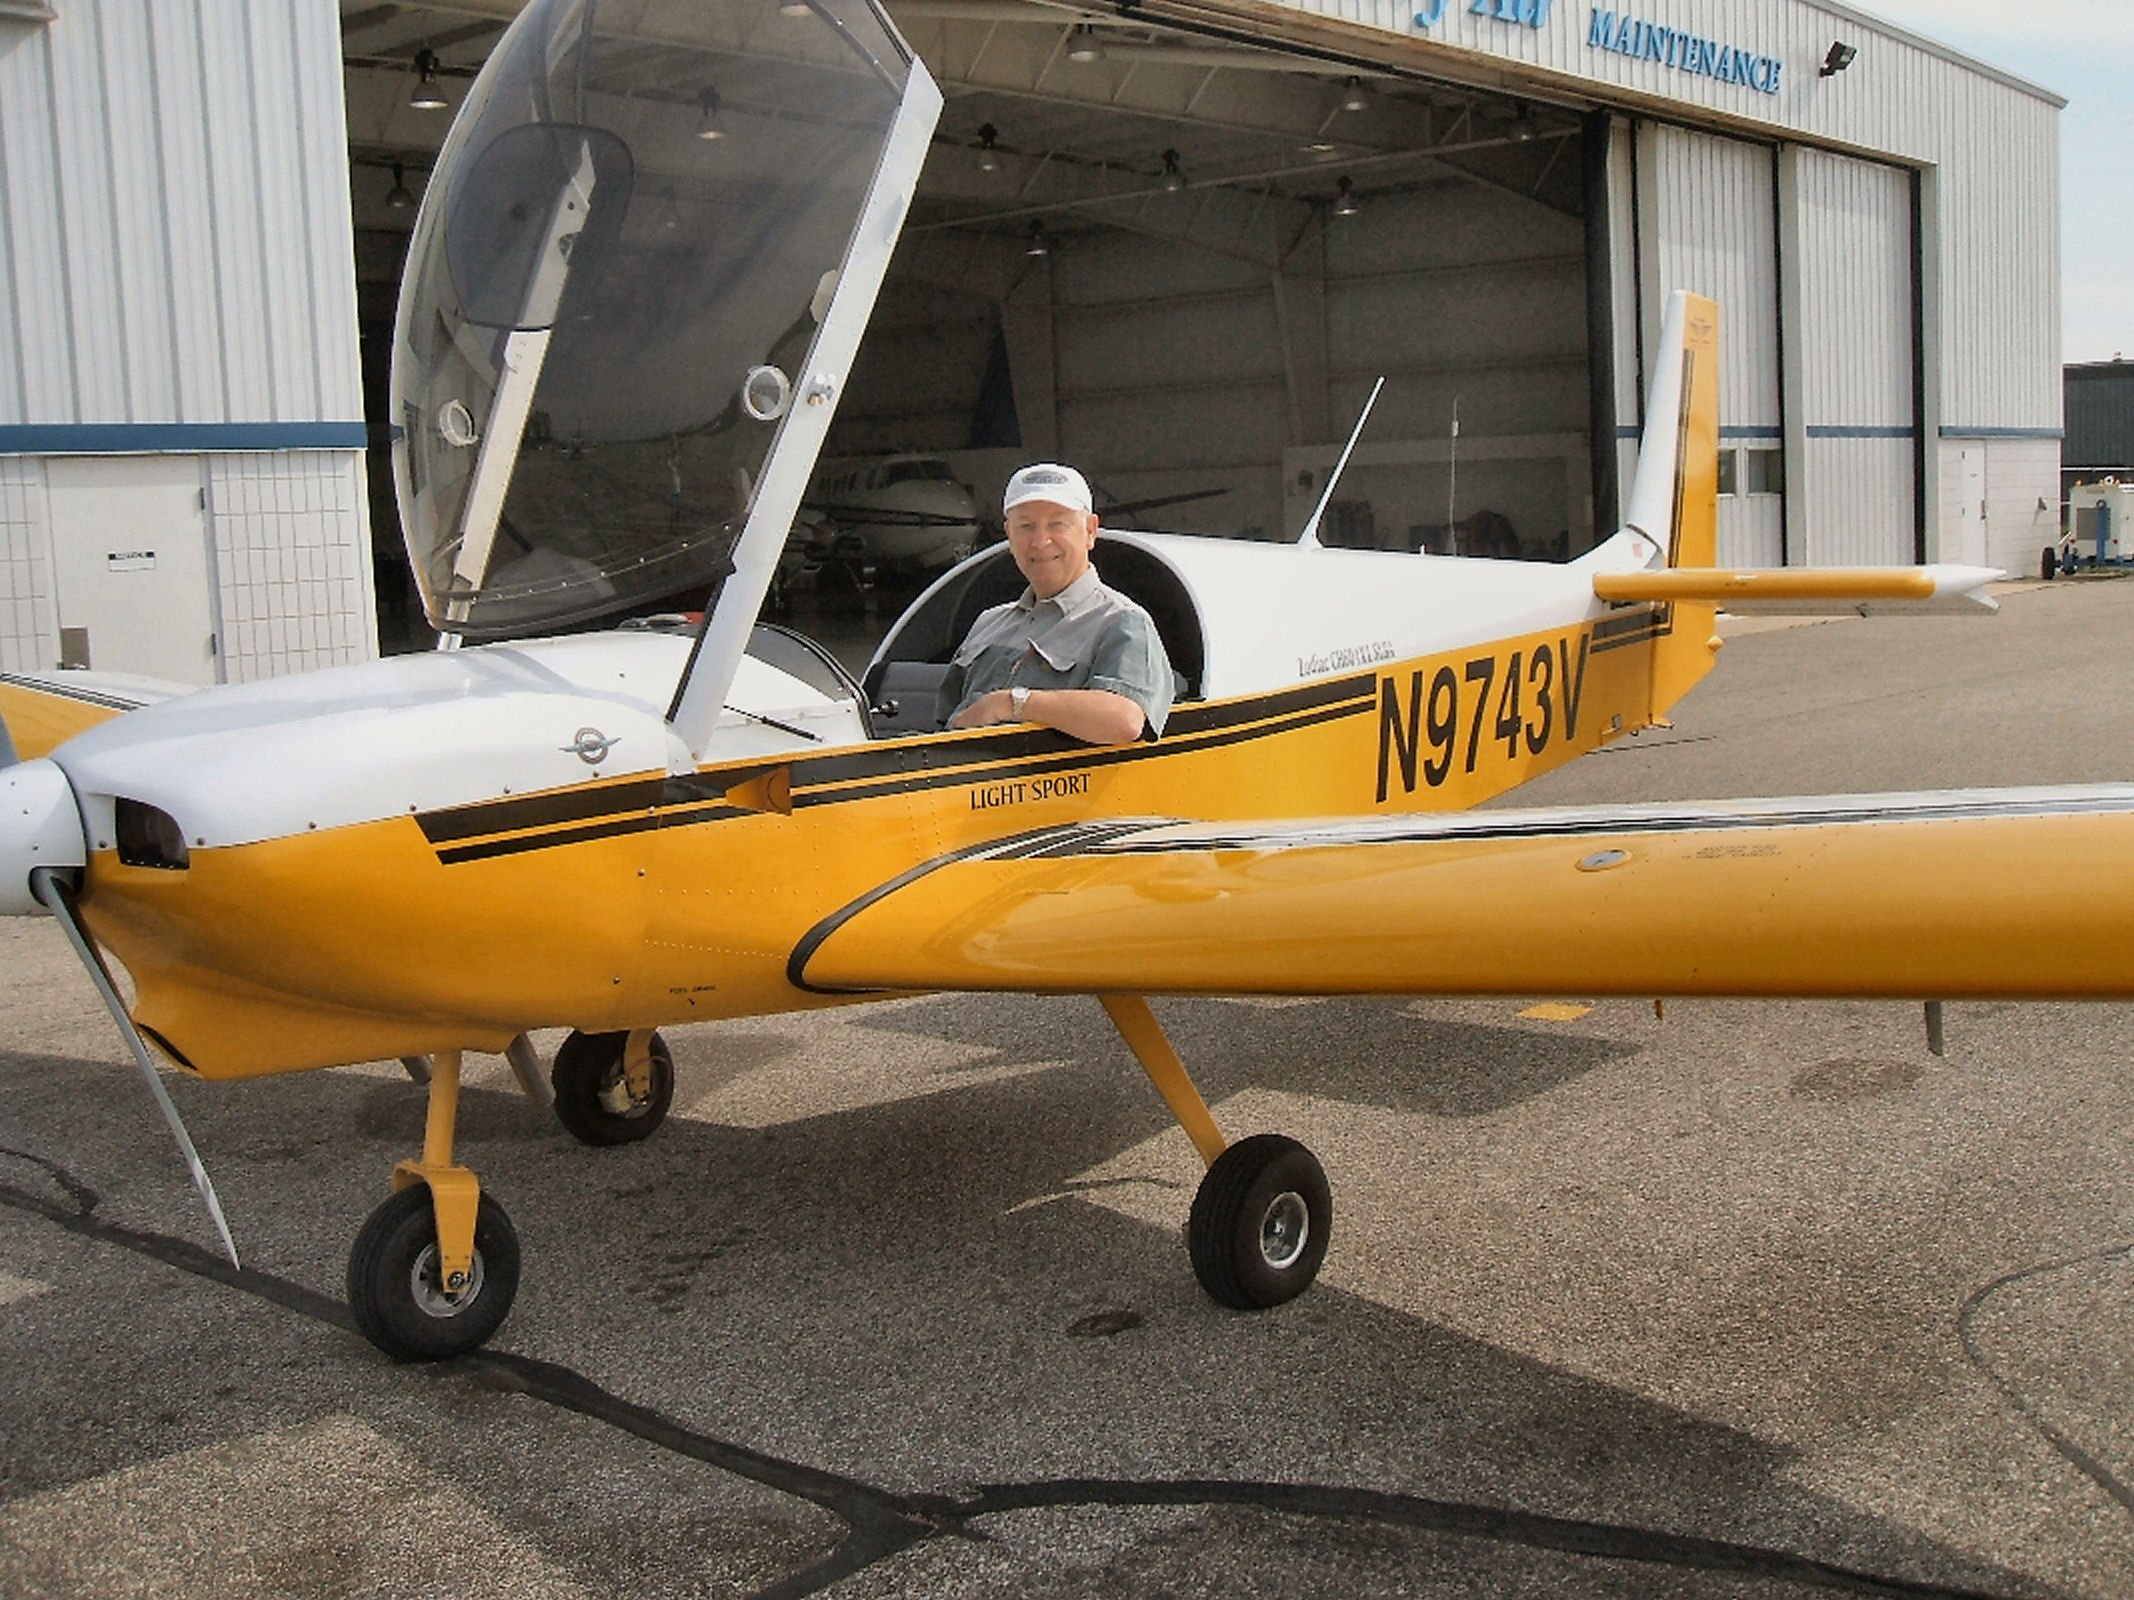  Darrel testing all the instruments aboard the zodiac airplane he piloted. He spoiled himself and many people with rides flying over West Michigan. 